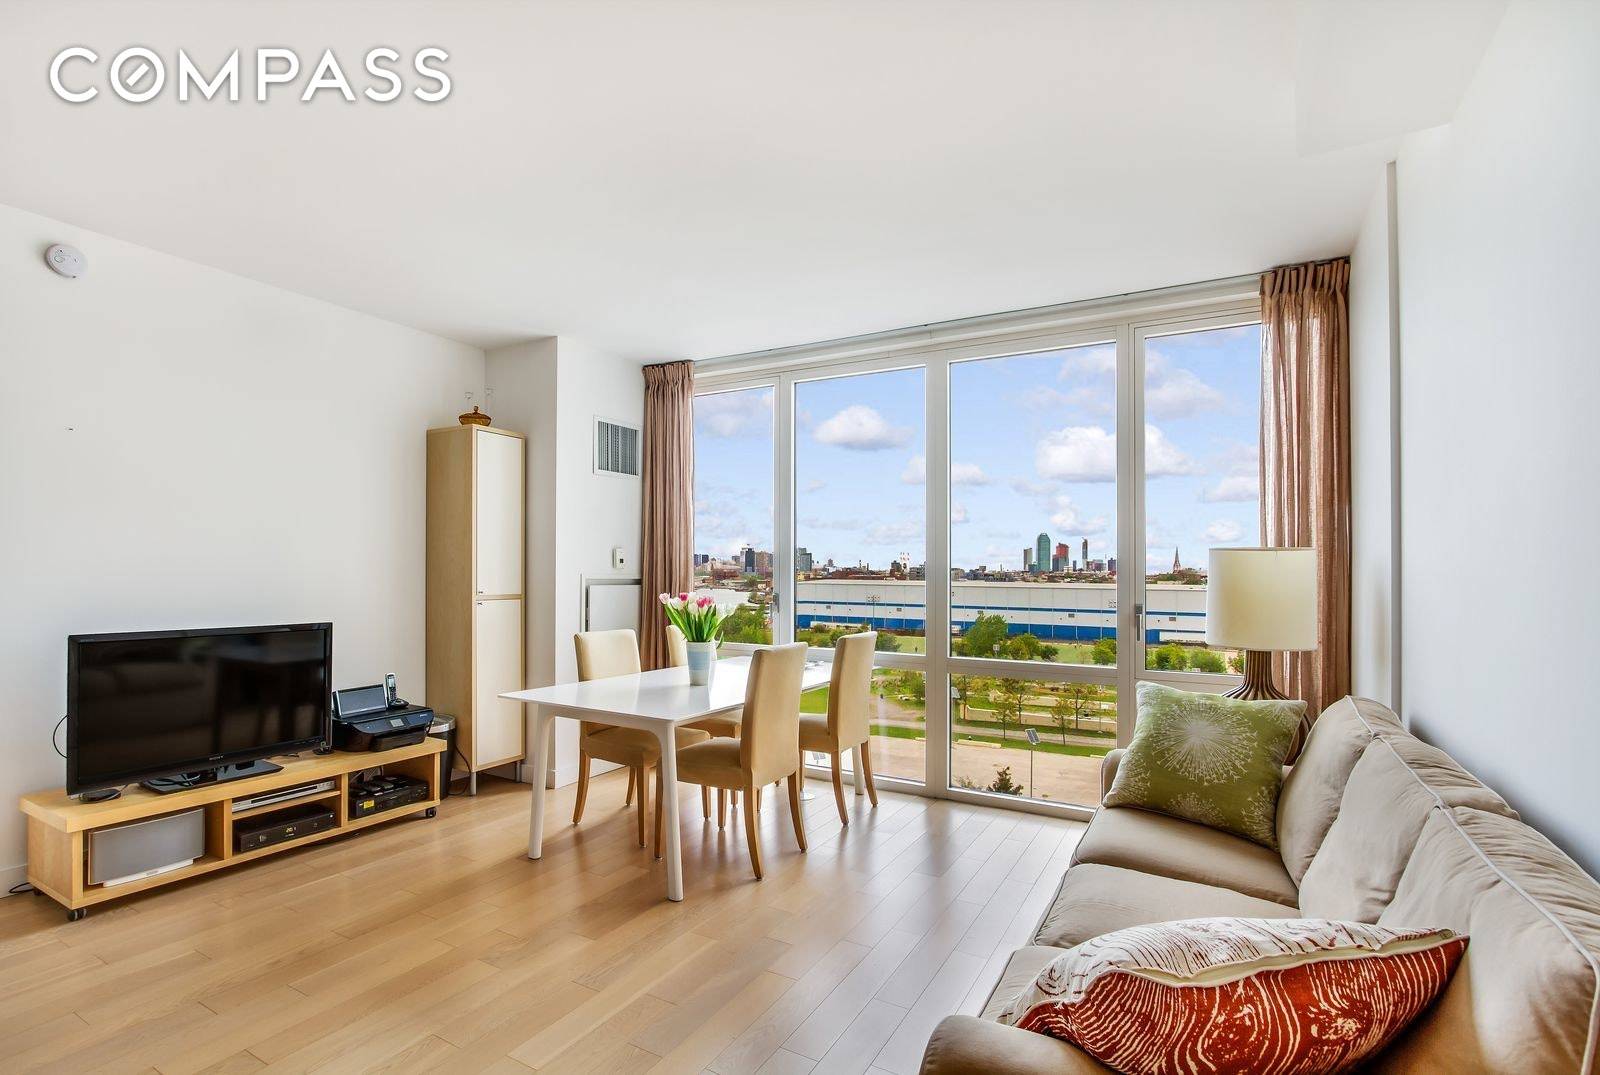 Williamsburg s Premier Condo The EDGE Large 1BD 1BA with Incredible Skyline Views, Chef's Kitchen with Integrated Appliances, M W, D W, Breakfast Bar, Incredible Closet Space Throughout, Washer Dryer ...